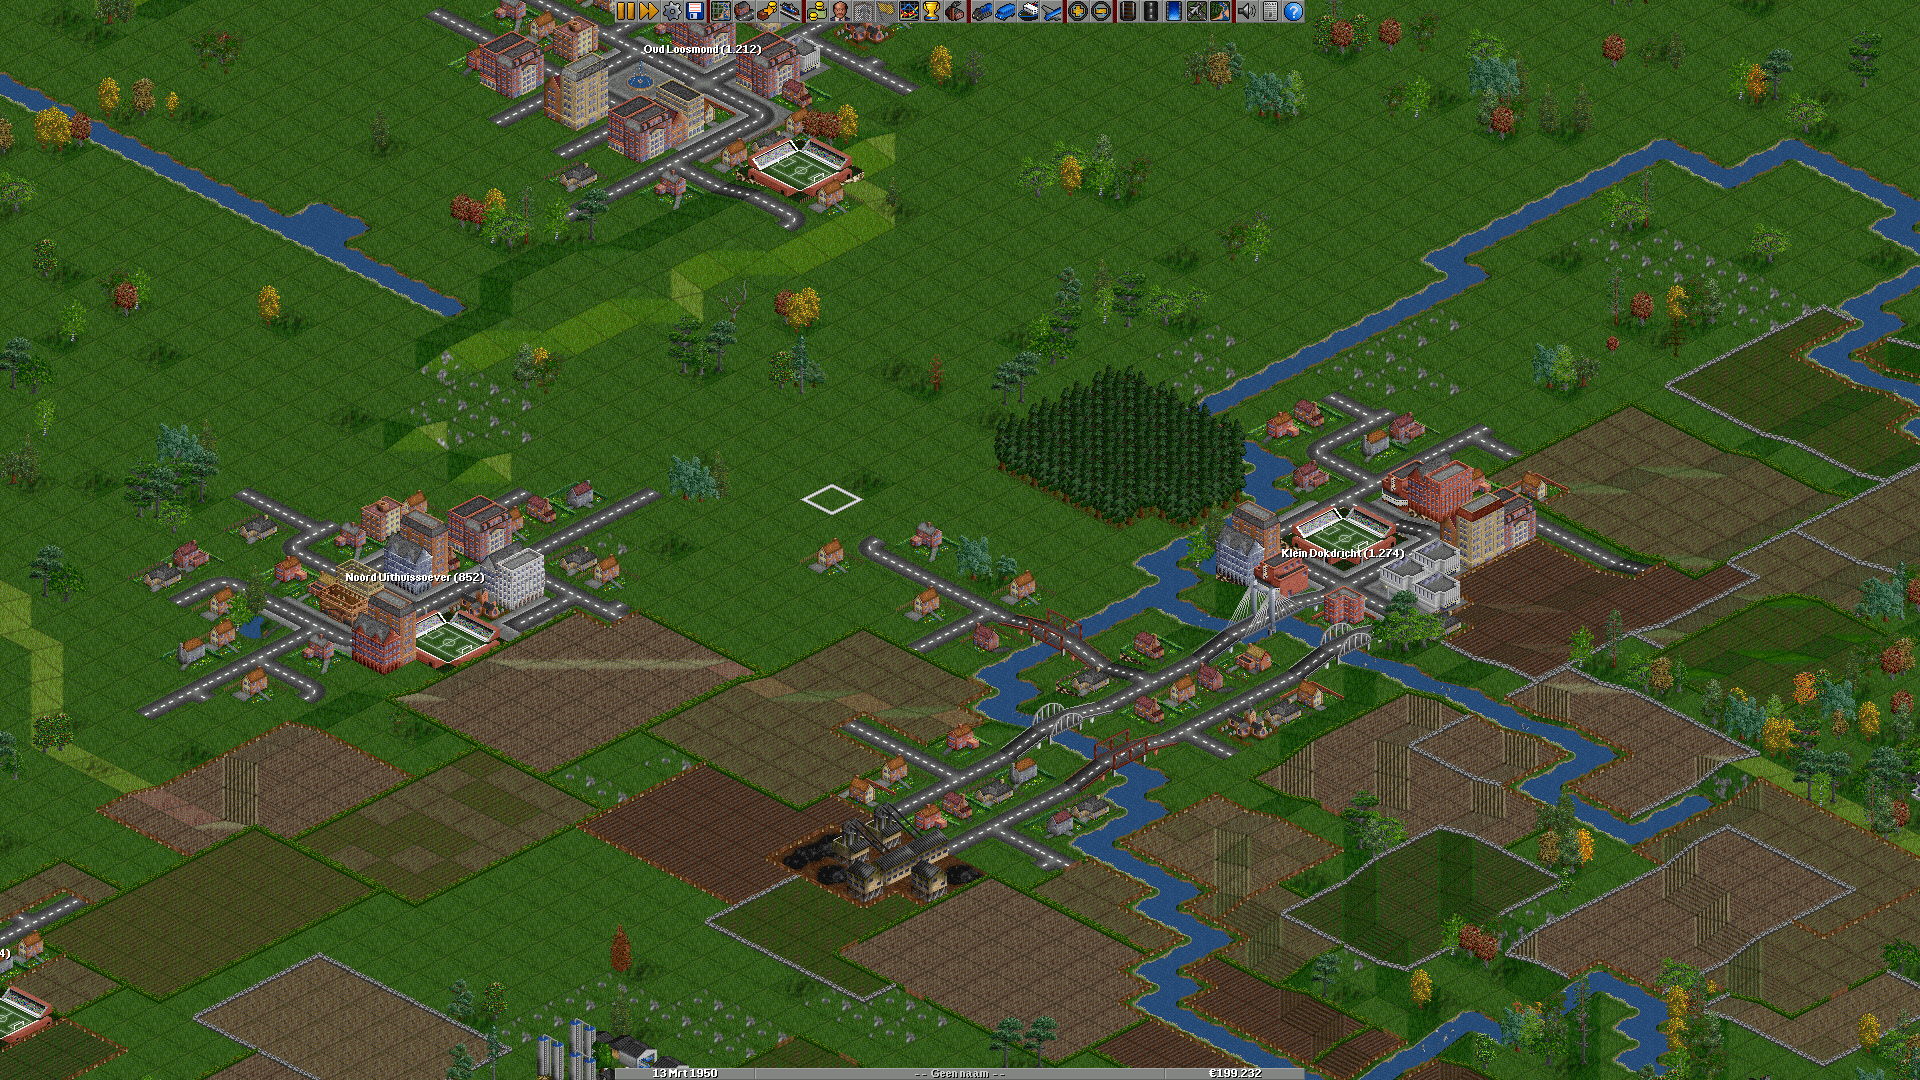 Camp tycoon. Open transport Tycoon Deluxe. Transport Tycoon (1995). Transport Tycoon 2050. Transport Tycoon Deluxe 2022.